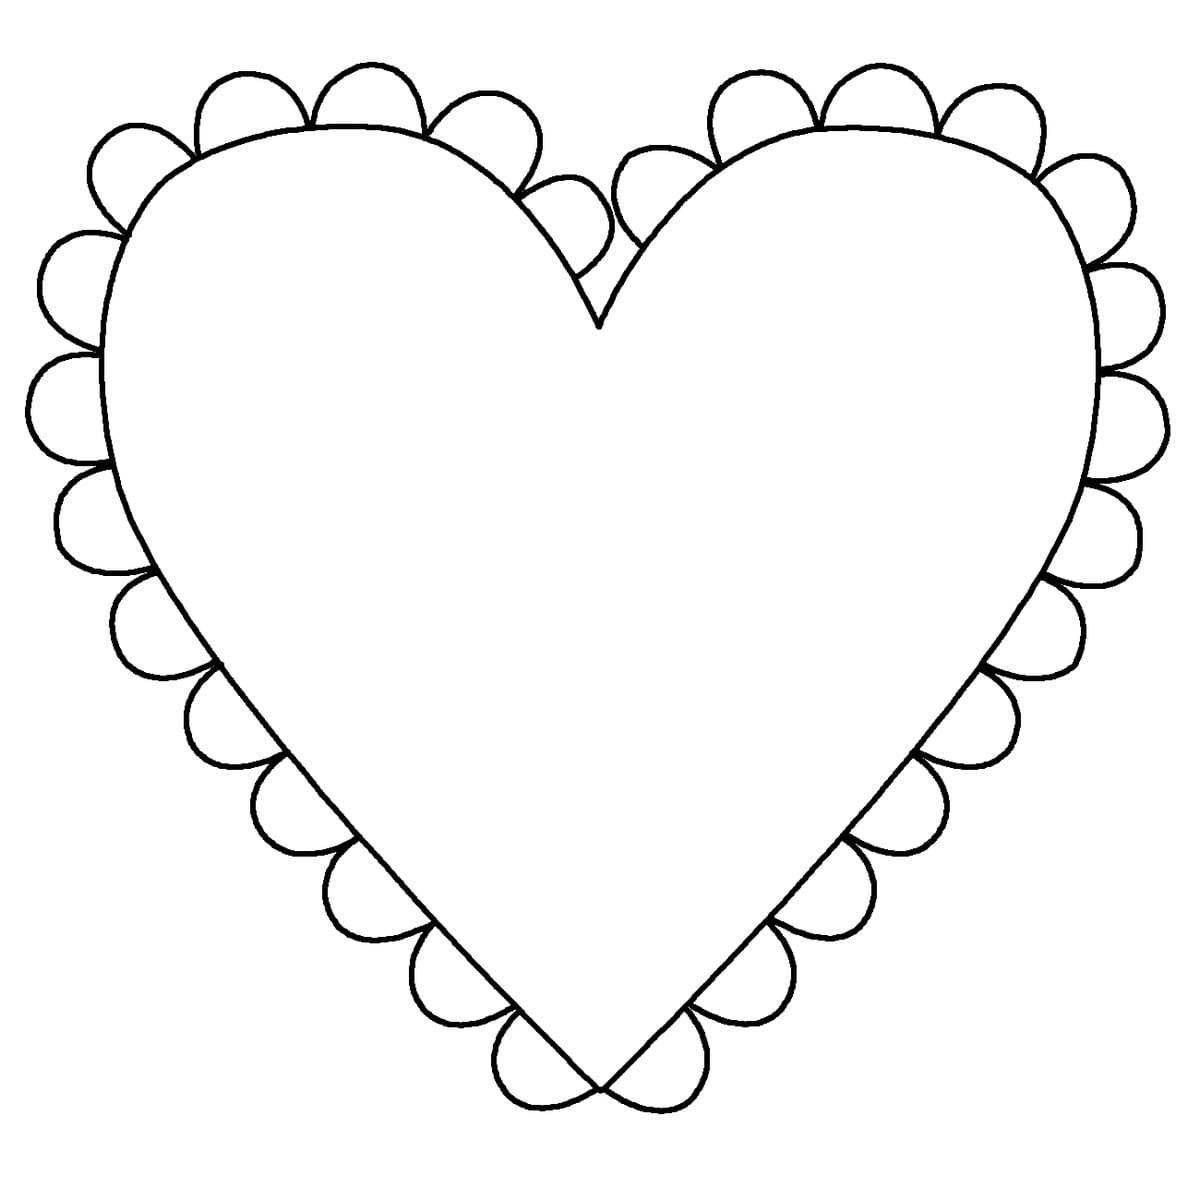 Colored heart coloring page for kids